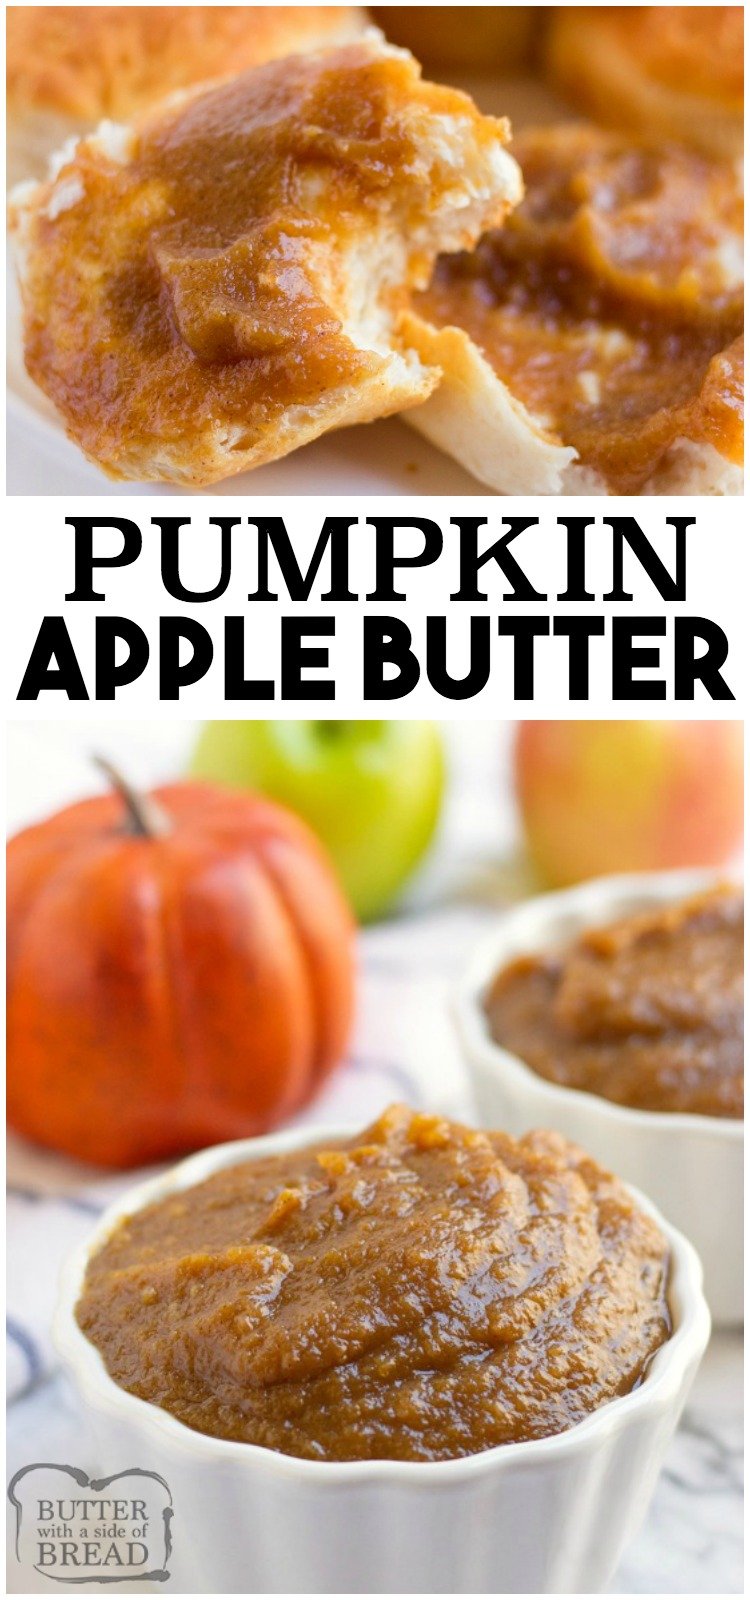 Crockpot Pumpkin Apple Butter recipe made with fresh apples, pumpkin puree and a blend of heavenly fall spices. Cooked slow to allow for a buttery smooth consistency and an incredible flavor! #apple #pumpkin #recipe #butter #crockpot #slowcooker recipe from BUTTER WITH A SIDE OF BREAD